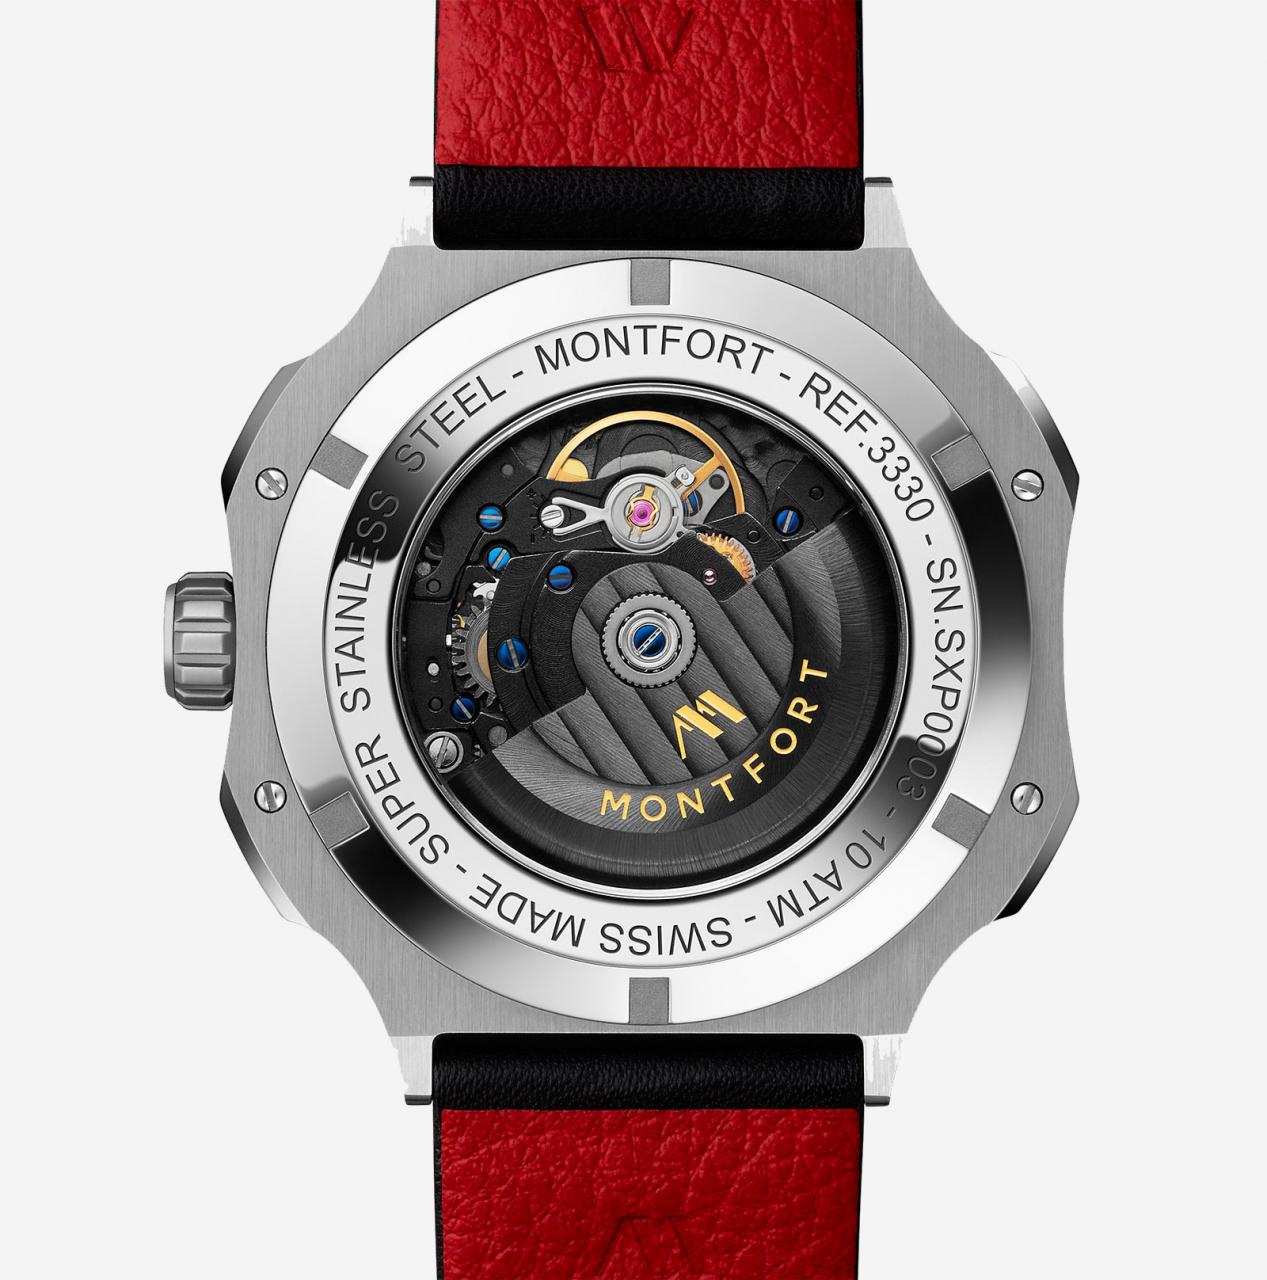 Montfront Strata watch 3D printed dial watch